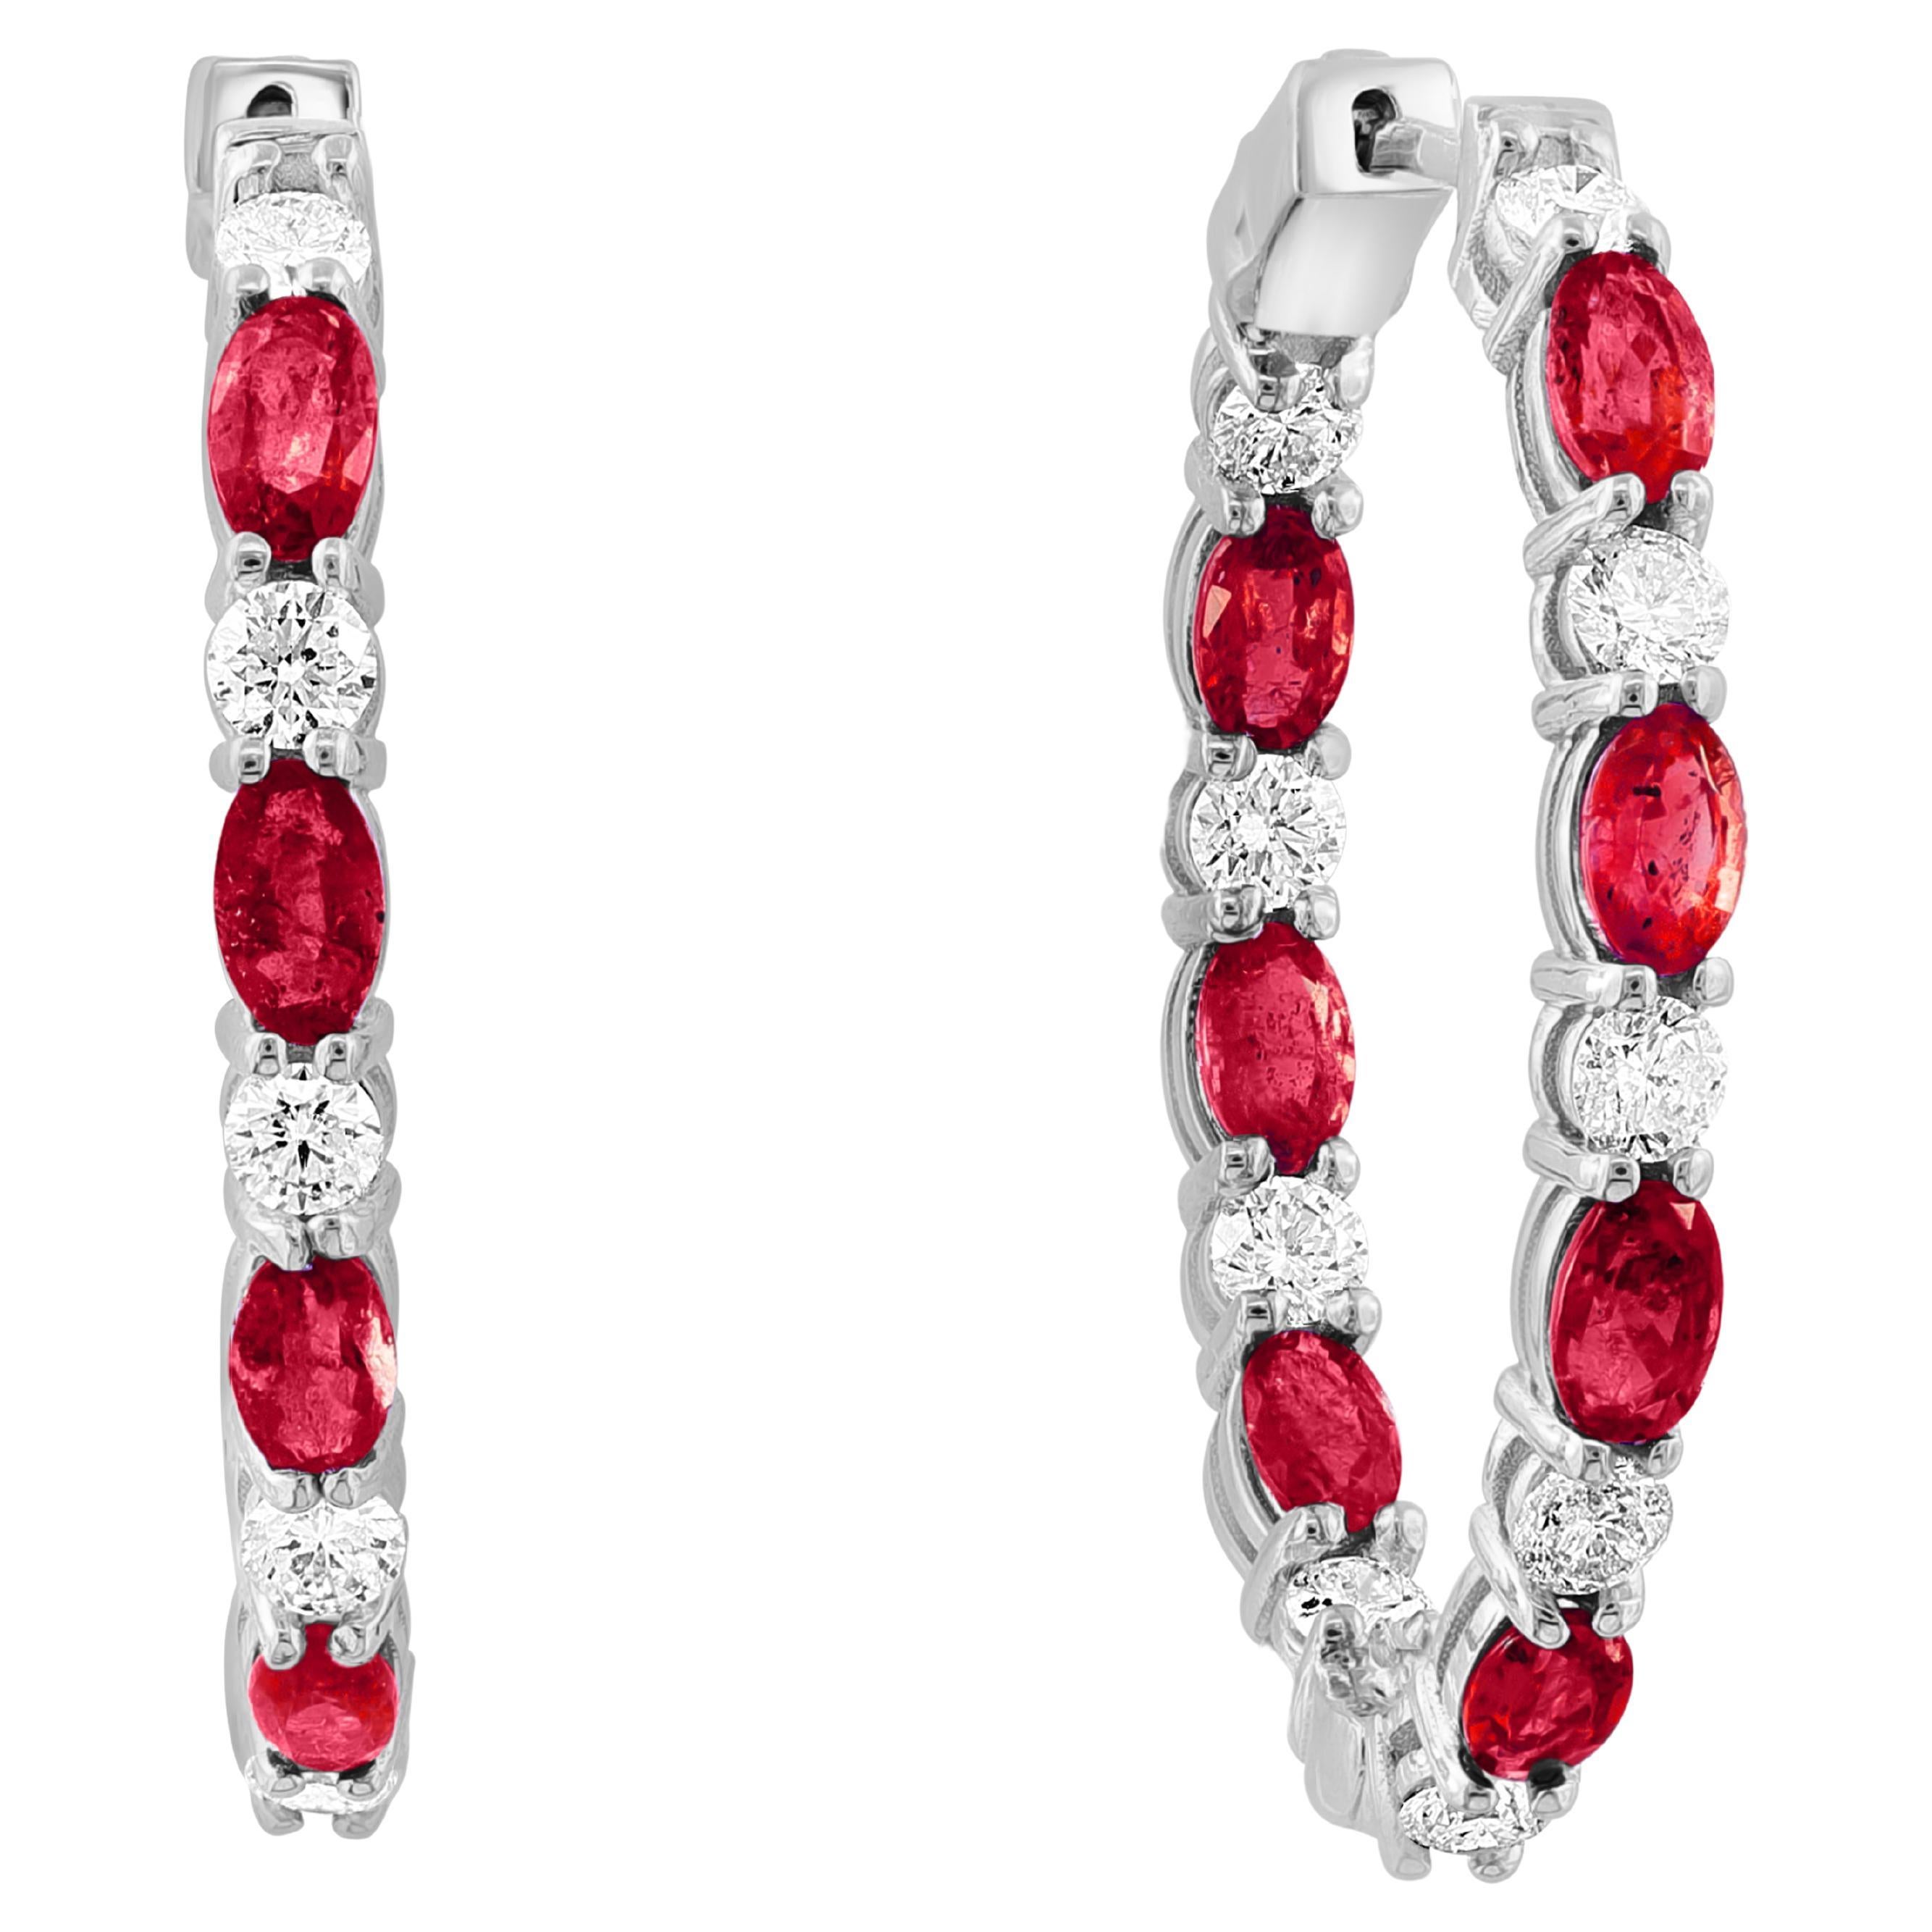 4.73 Carat Oval Cut Ruby and Diamond Hoop Earrings in 14K White Gold For Sale